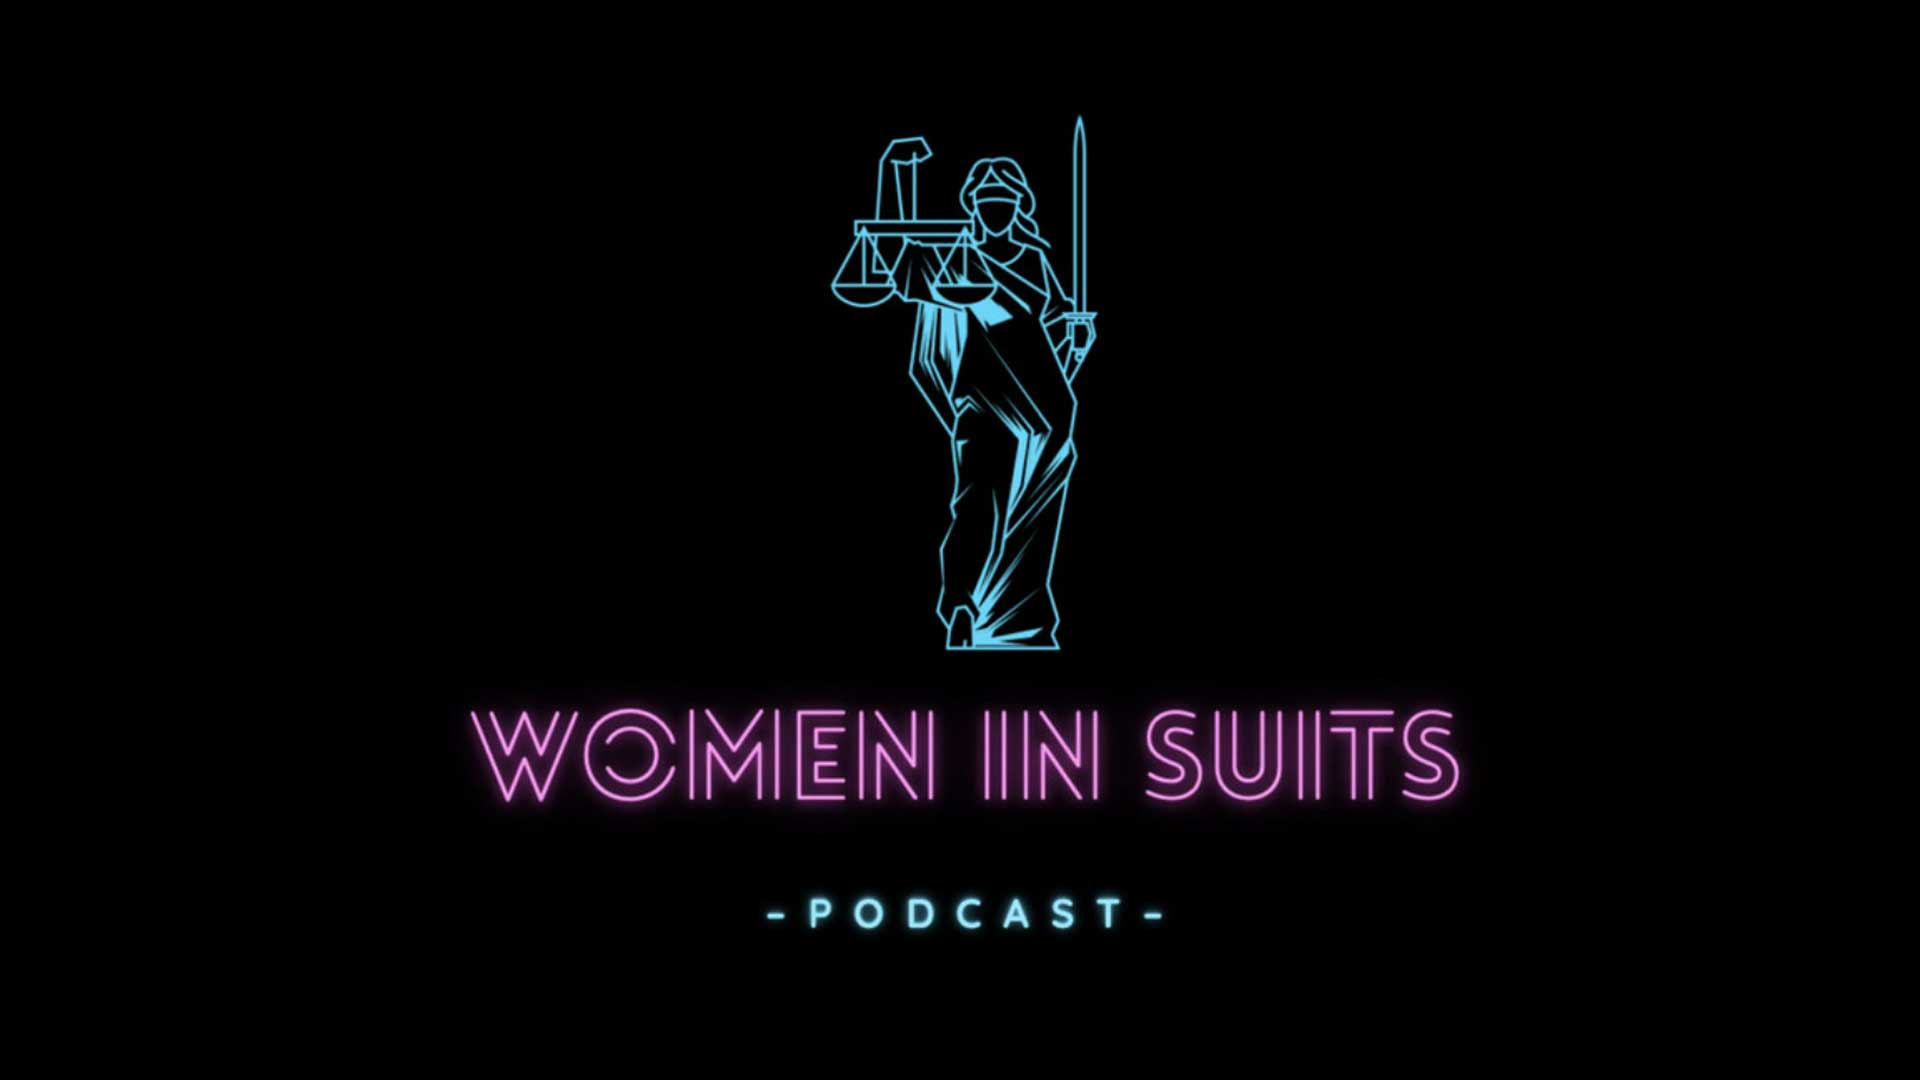 Illustration of Lady Justice on a black background with overlaid text reading "Women In Suits Podcast"